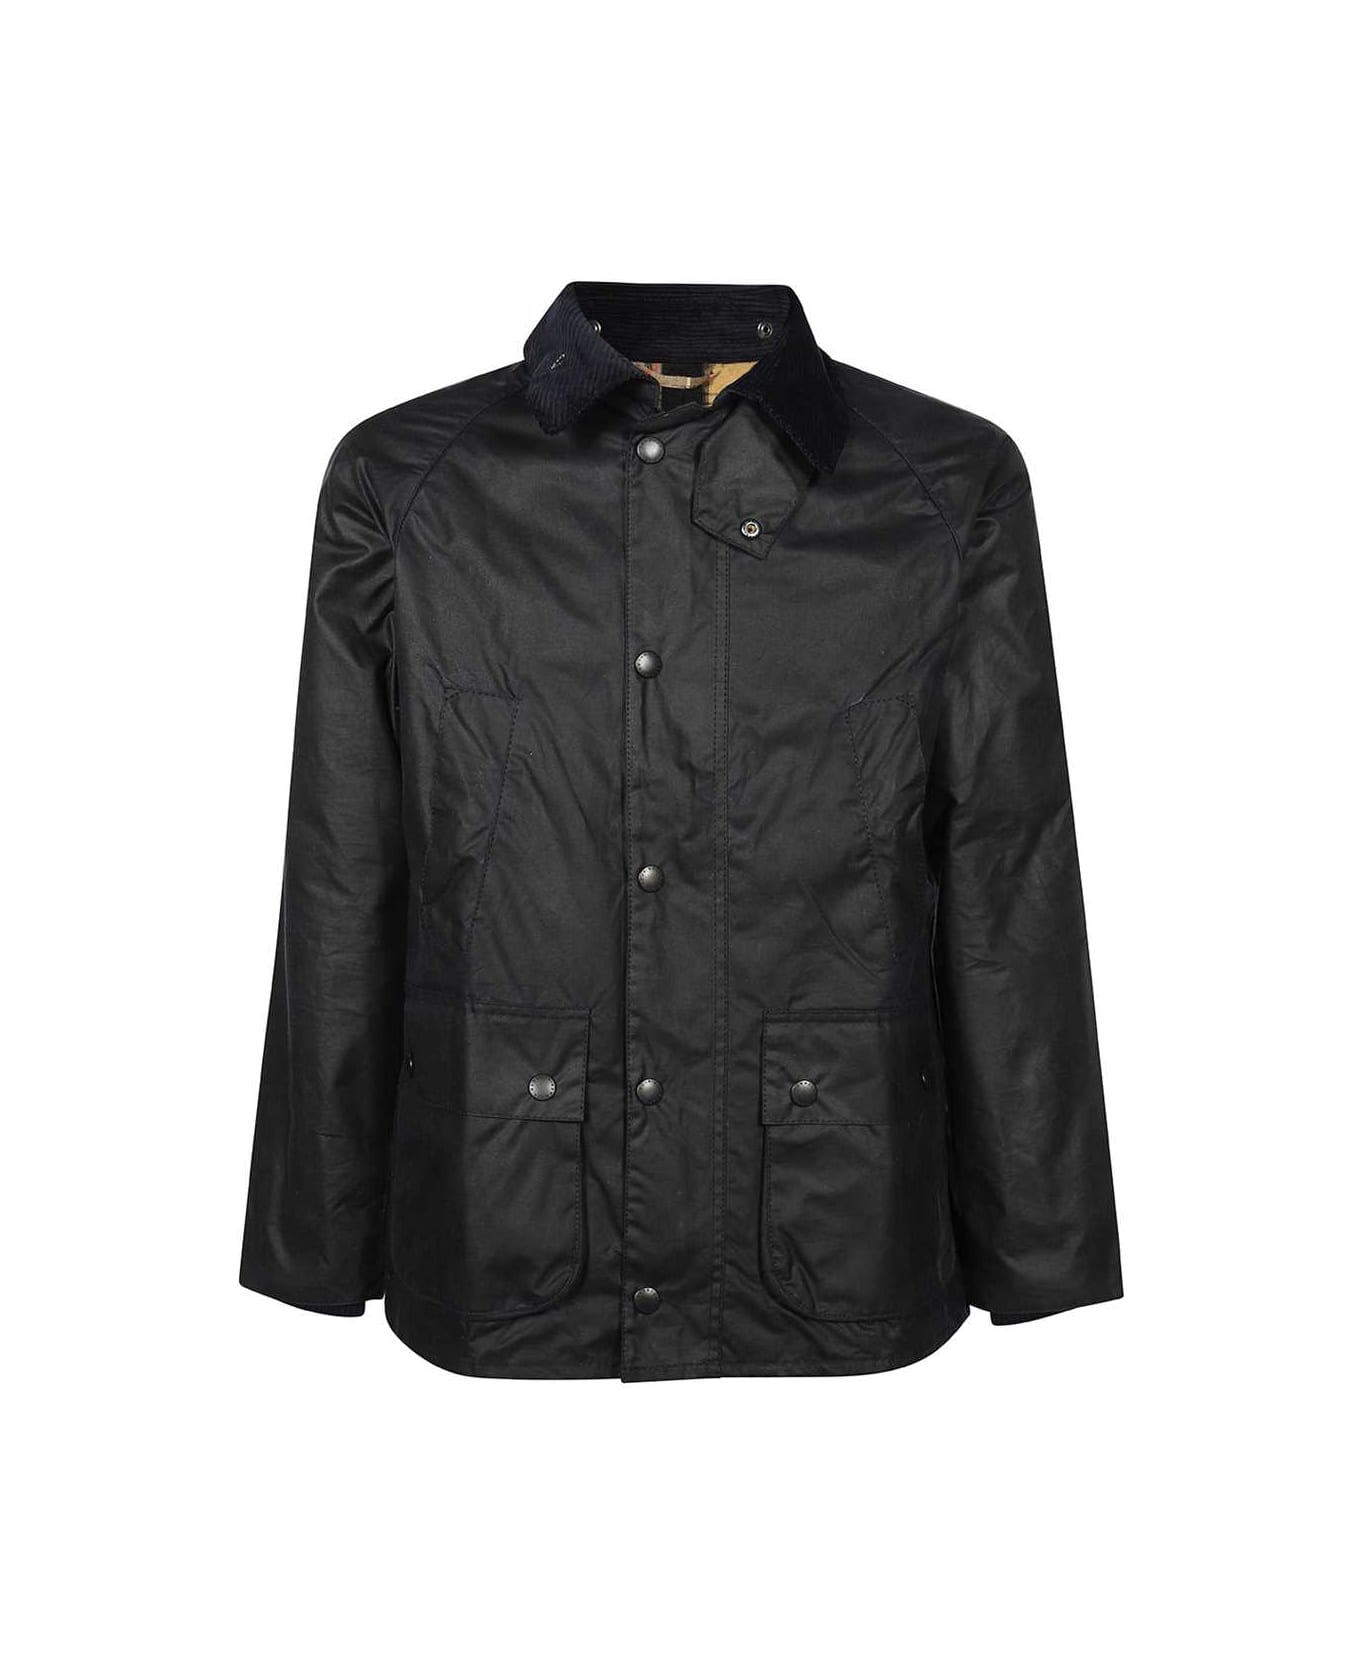 Barbour Waxed Cotton Jacket - blue